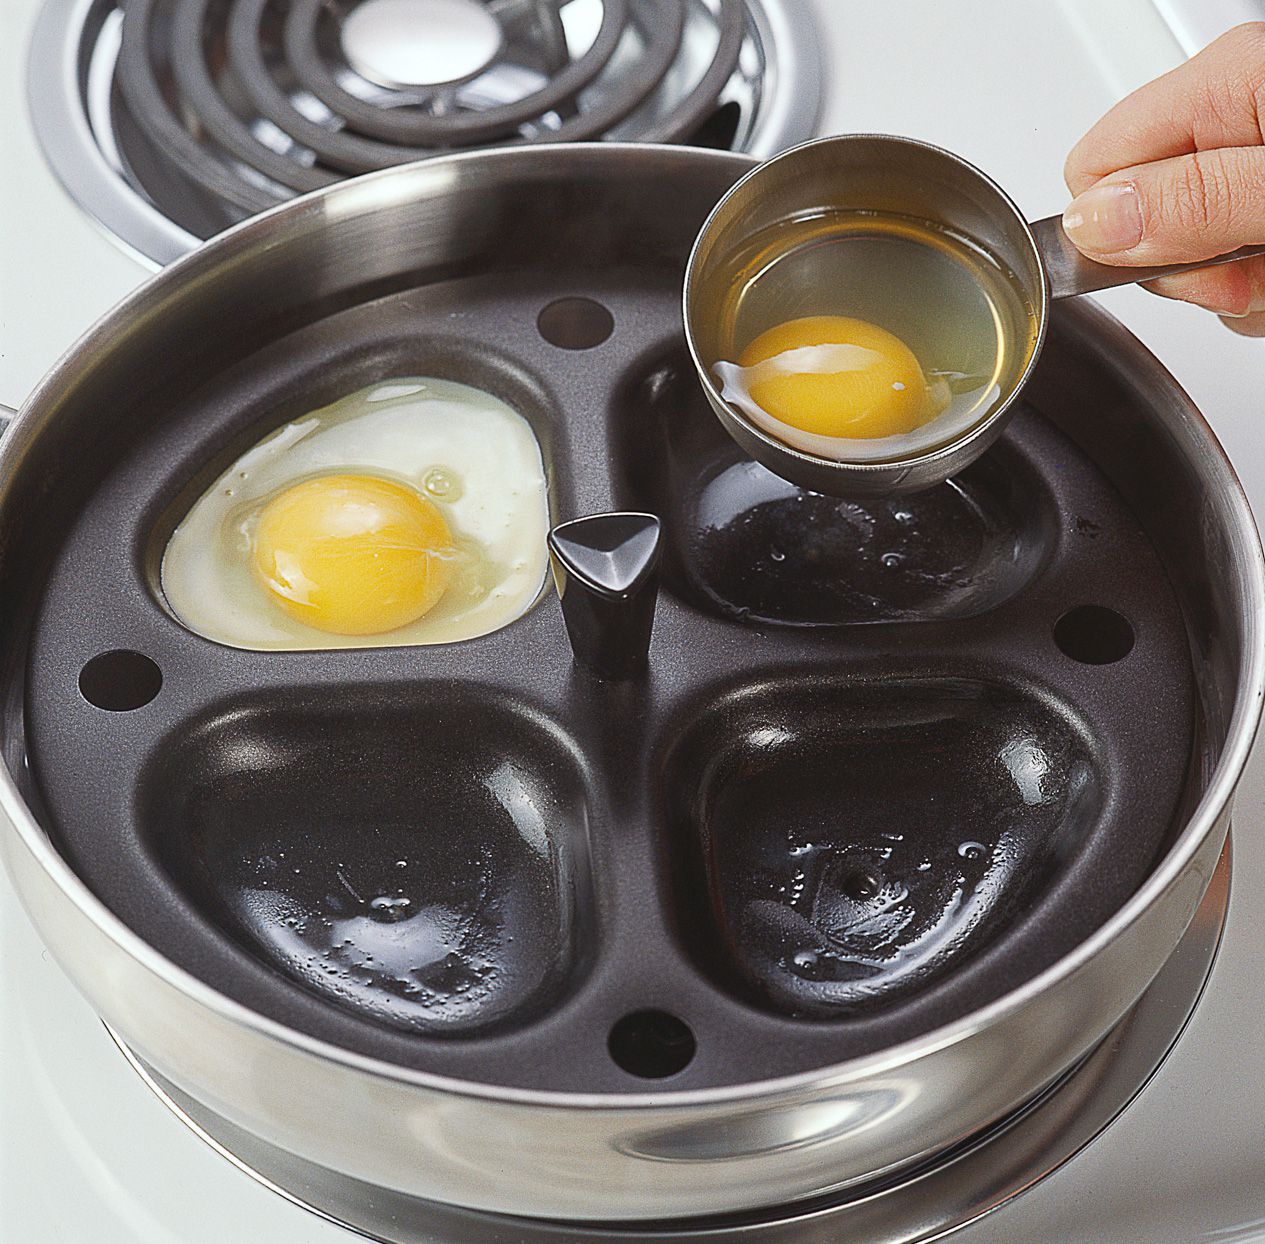 https://recipes.net/wp-content/uploads/2023/12/how-to-poach-egg-in-pan-1703767023.jpg